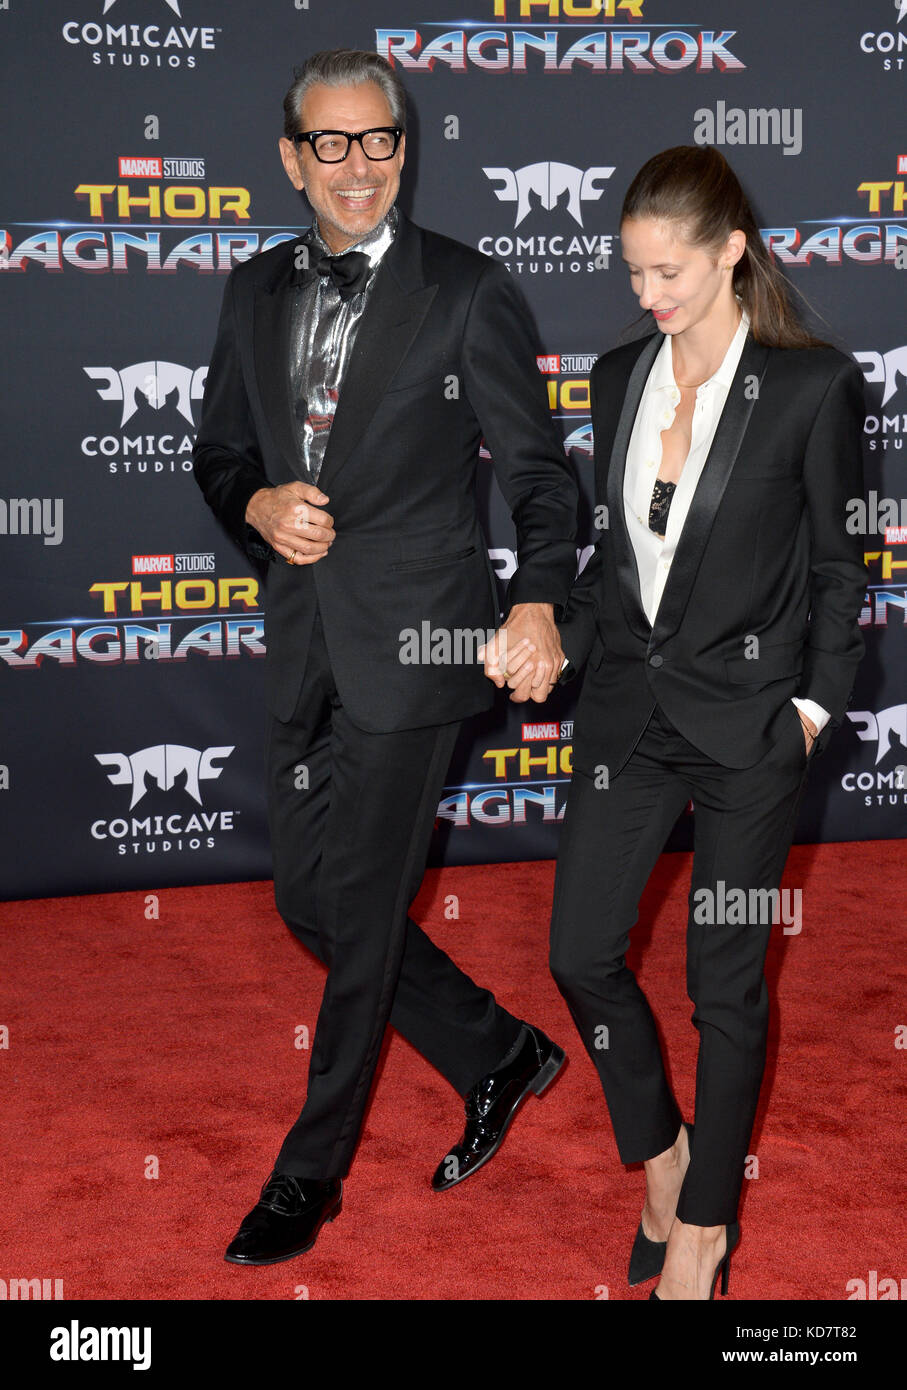 Los Angeles, USA. 10th Oct, 2017. Jeff Goldblum & Emilie Livingston at the premiere for 'Thor: Ragnarok' at the El Capitan Theatre Picture Credit: Sarah Stewart/Alamy Live News Stock Photo